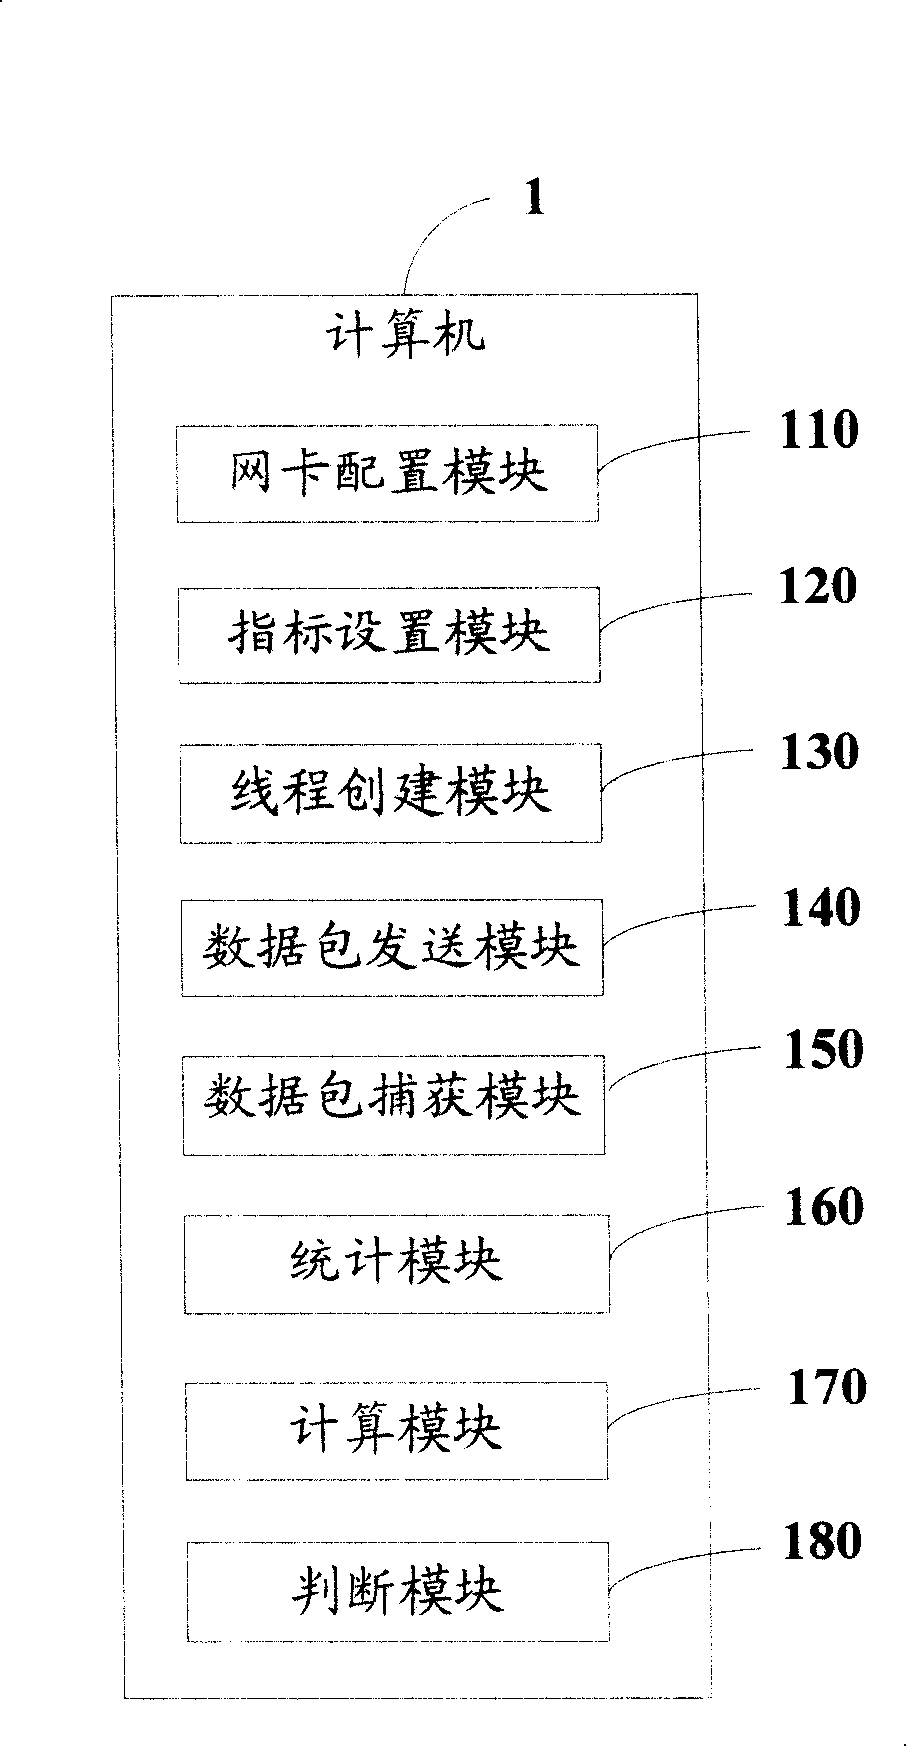 Network card transmission speed testing system and method